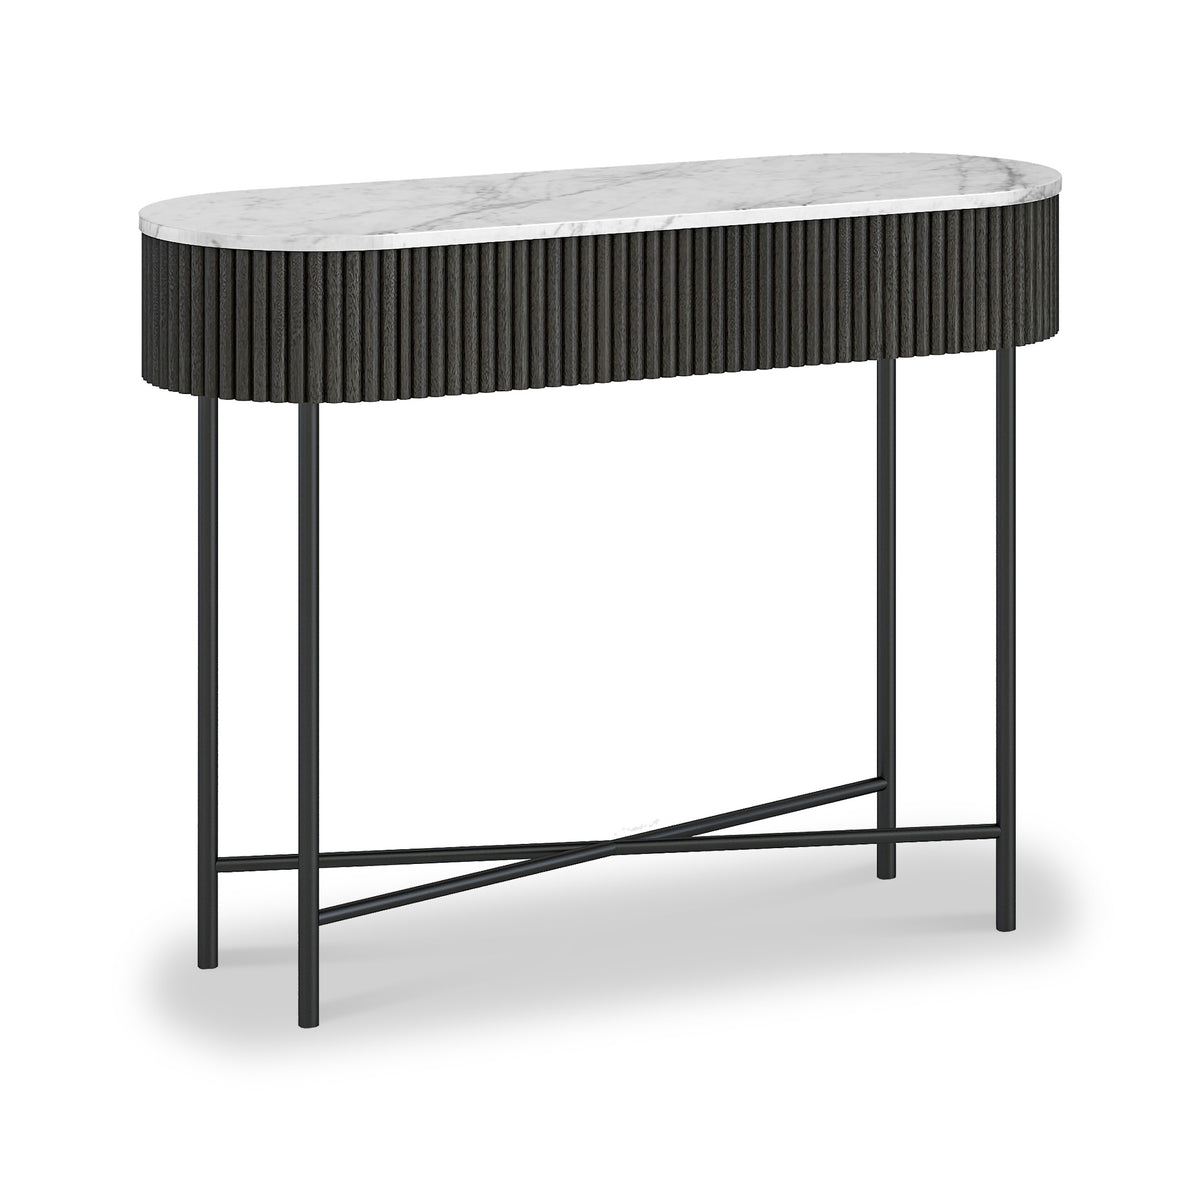 Milo Mango & Marble Black Fluted Console Table from Roseland Furniture